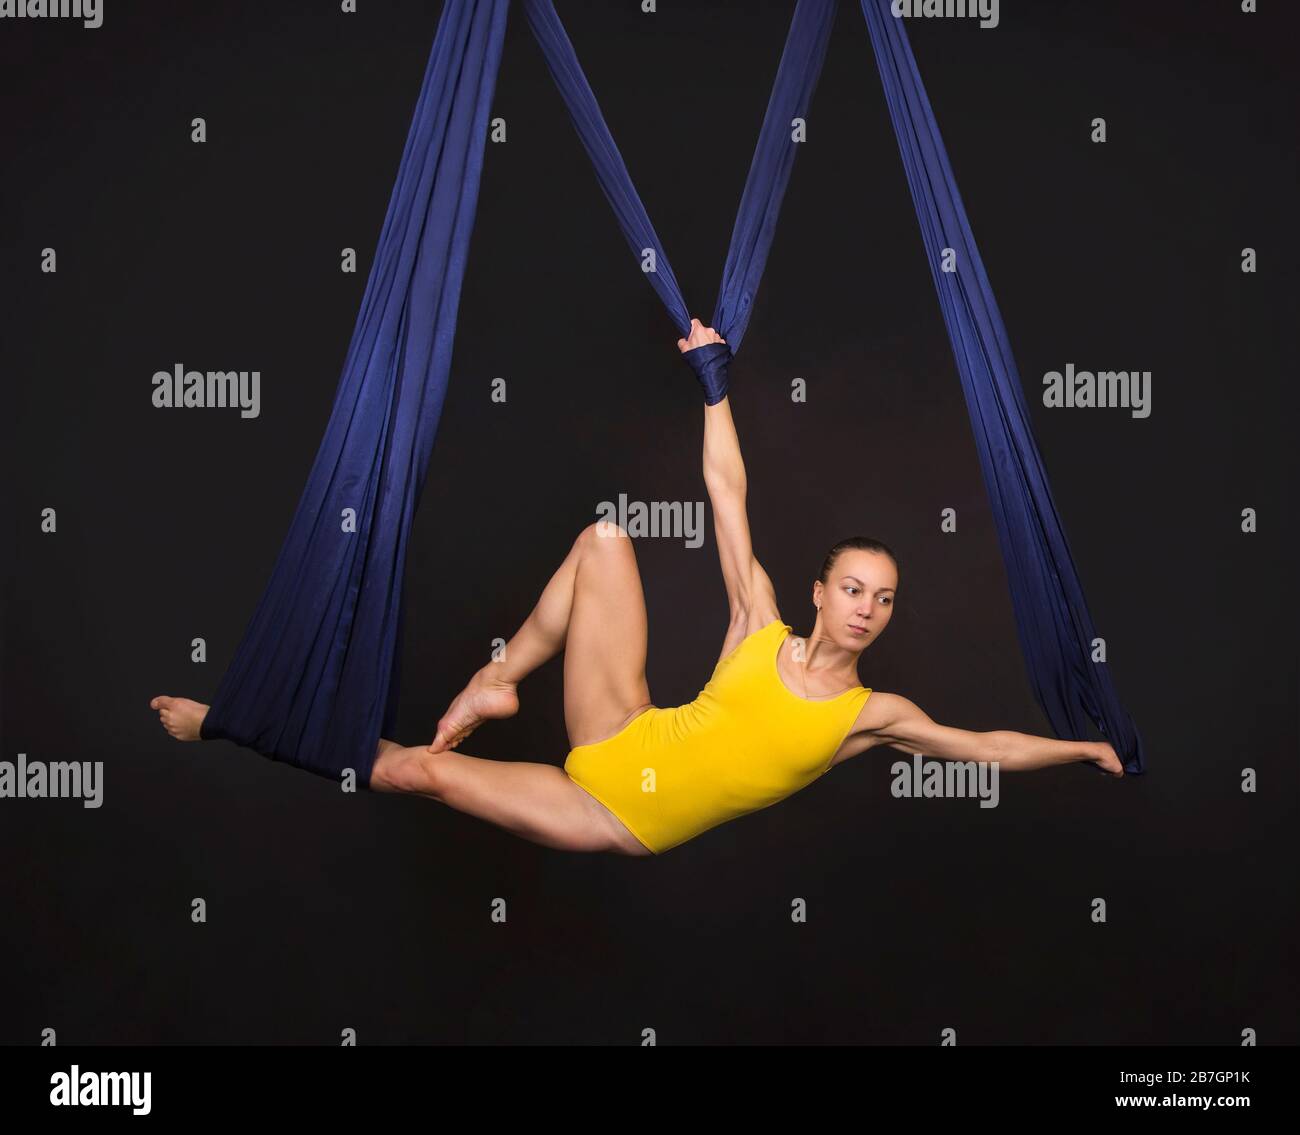 Young, smiling woman doing exercises on aerial silk. Studio shooting on a dark background. Stock Photo